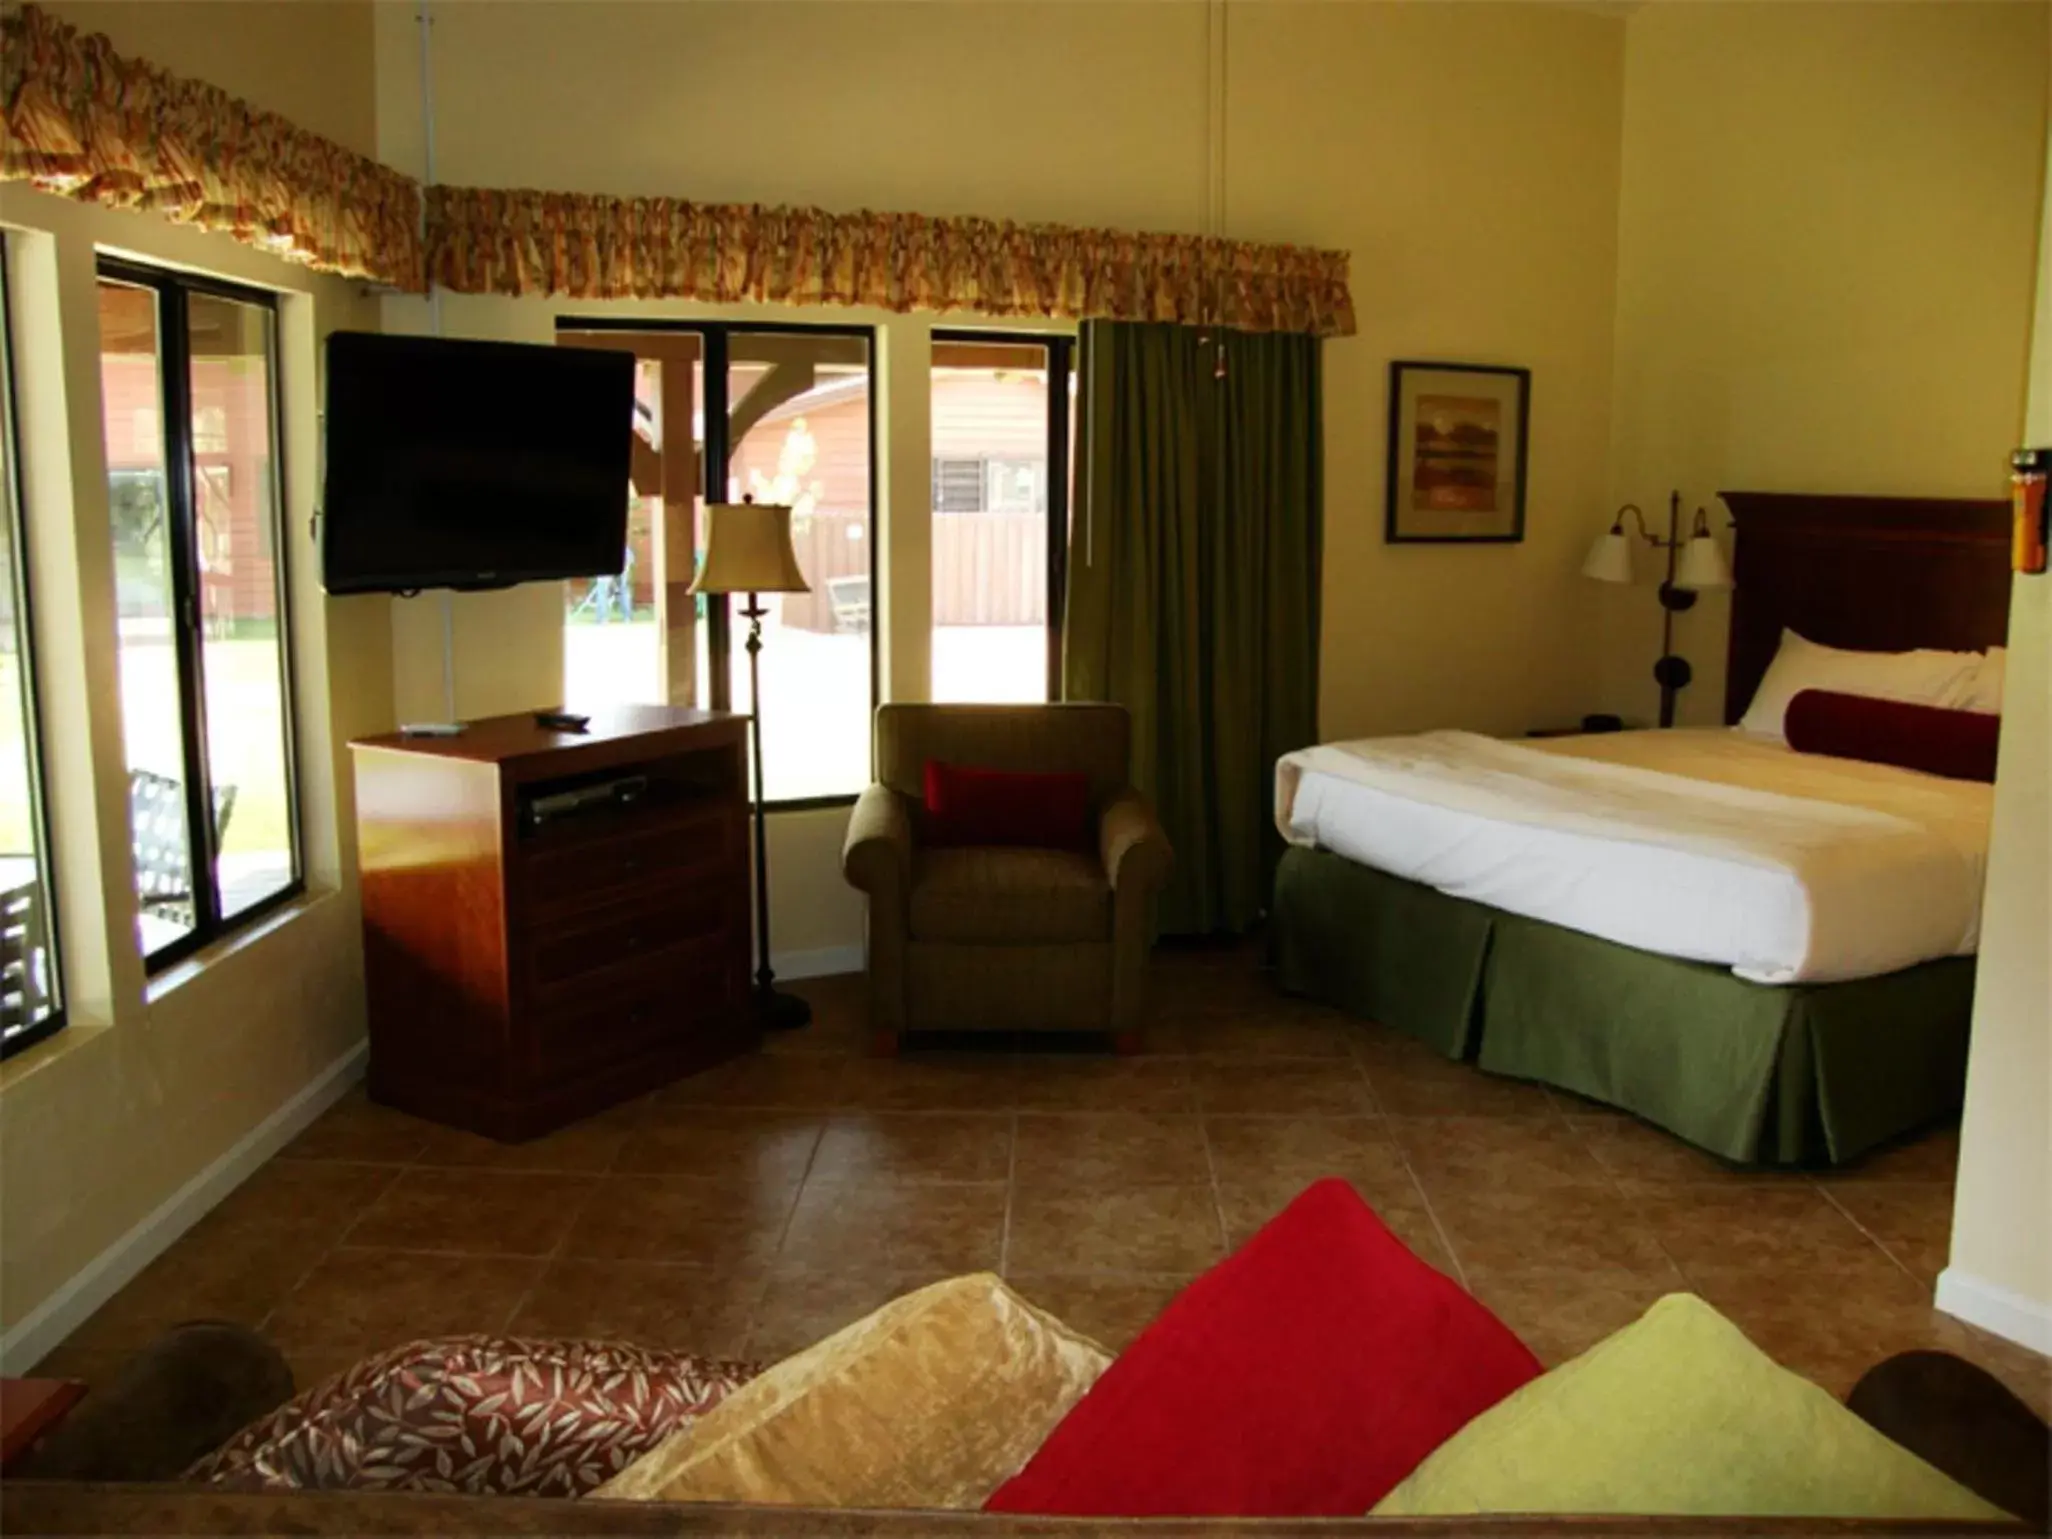 Bed in Roundhouse Resort, a VRI resort